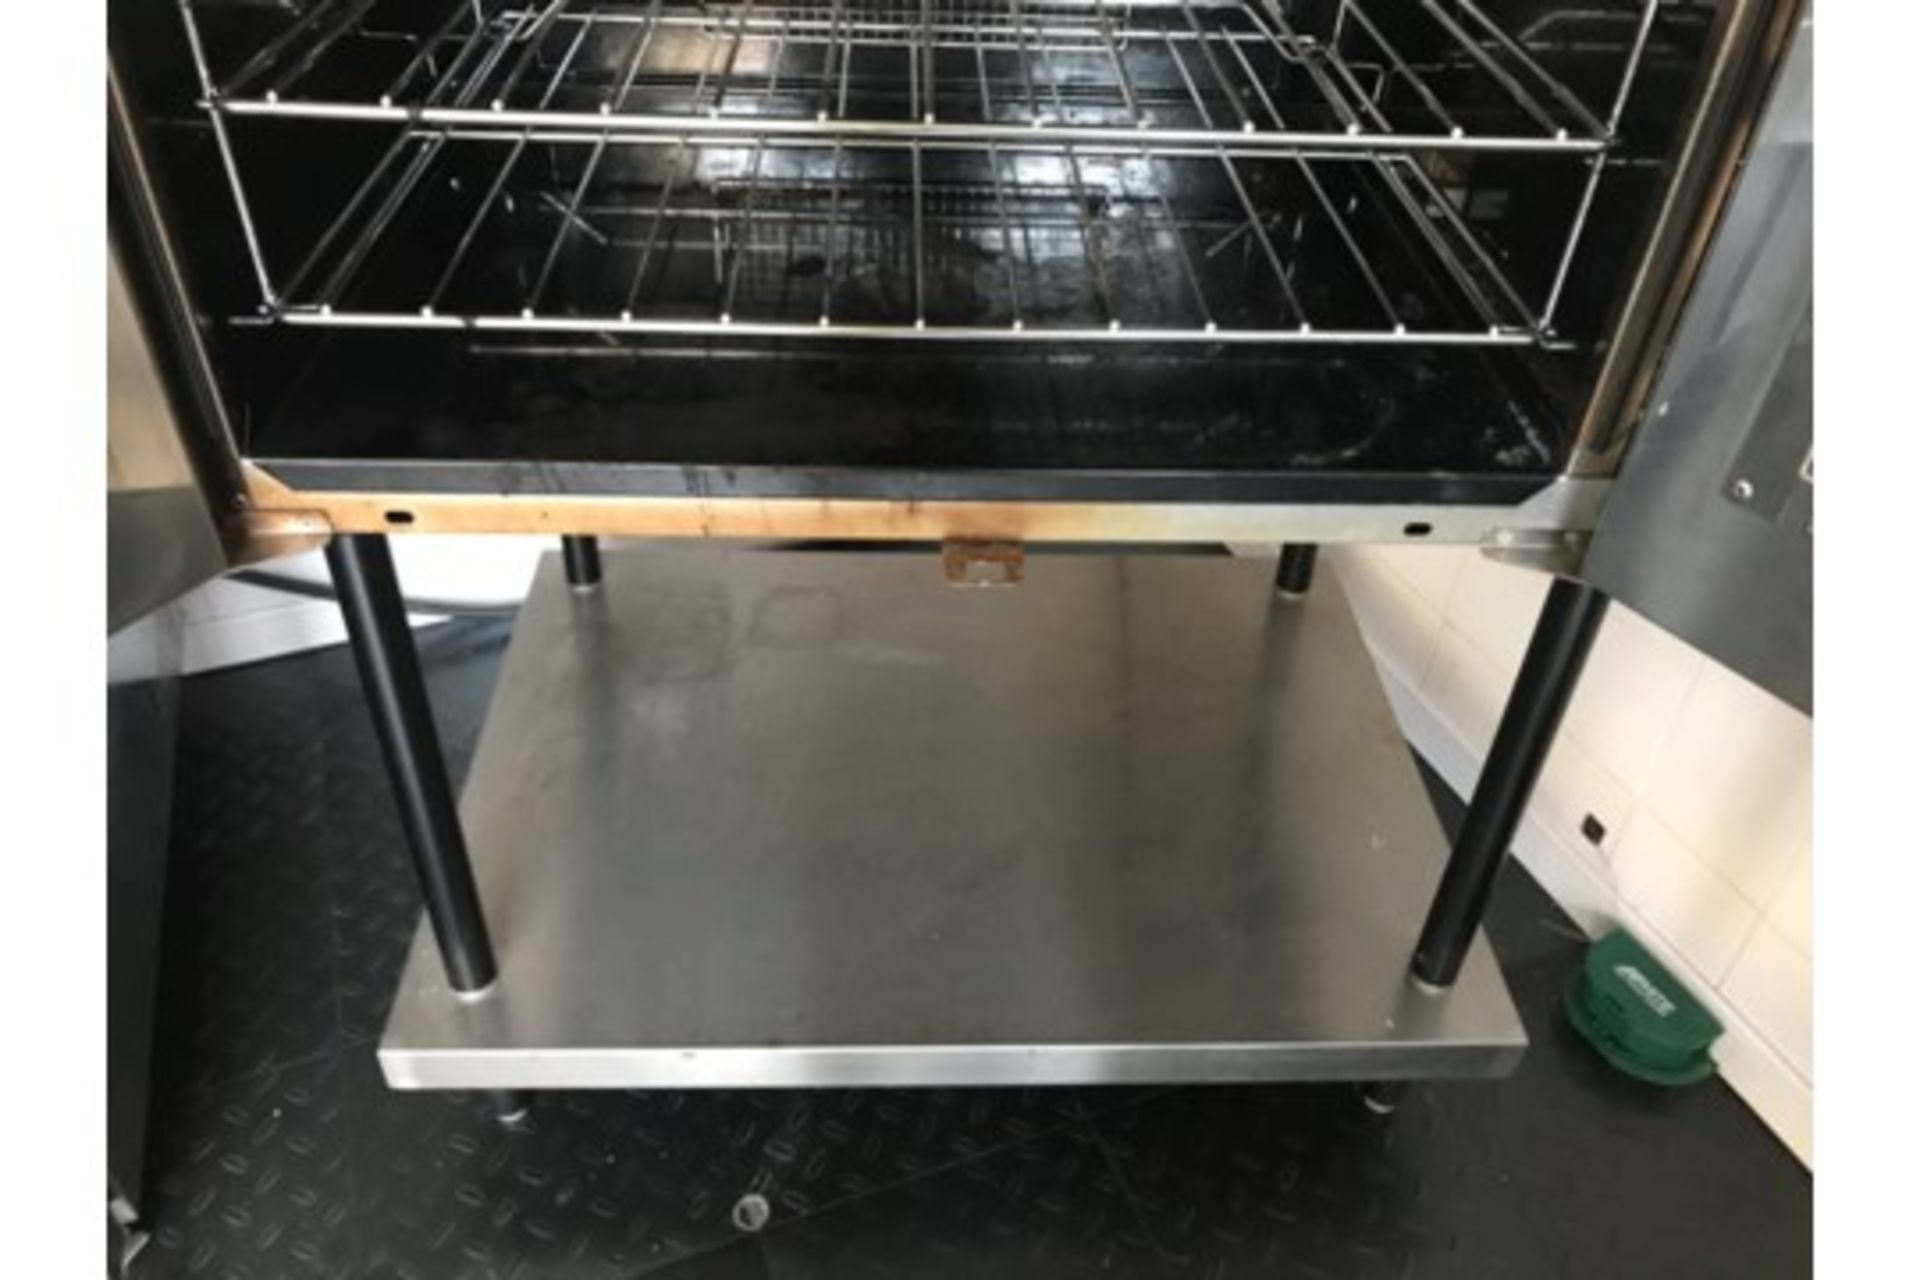 Moorwood Vulcan Convection Oven - Image 4 of 7